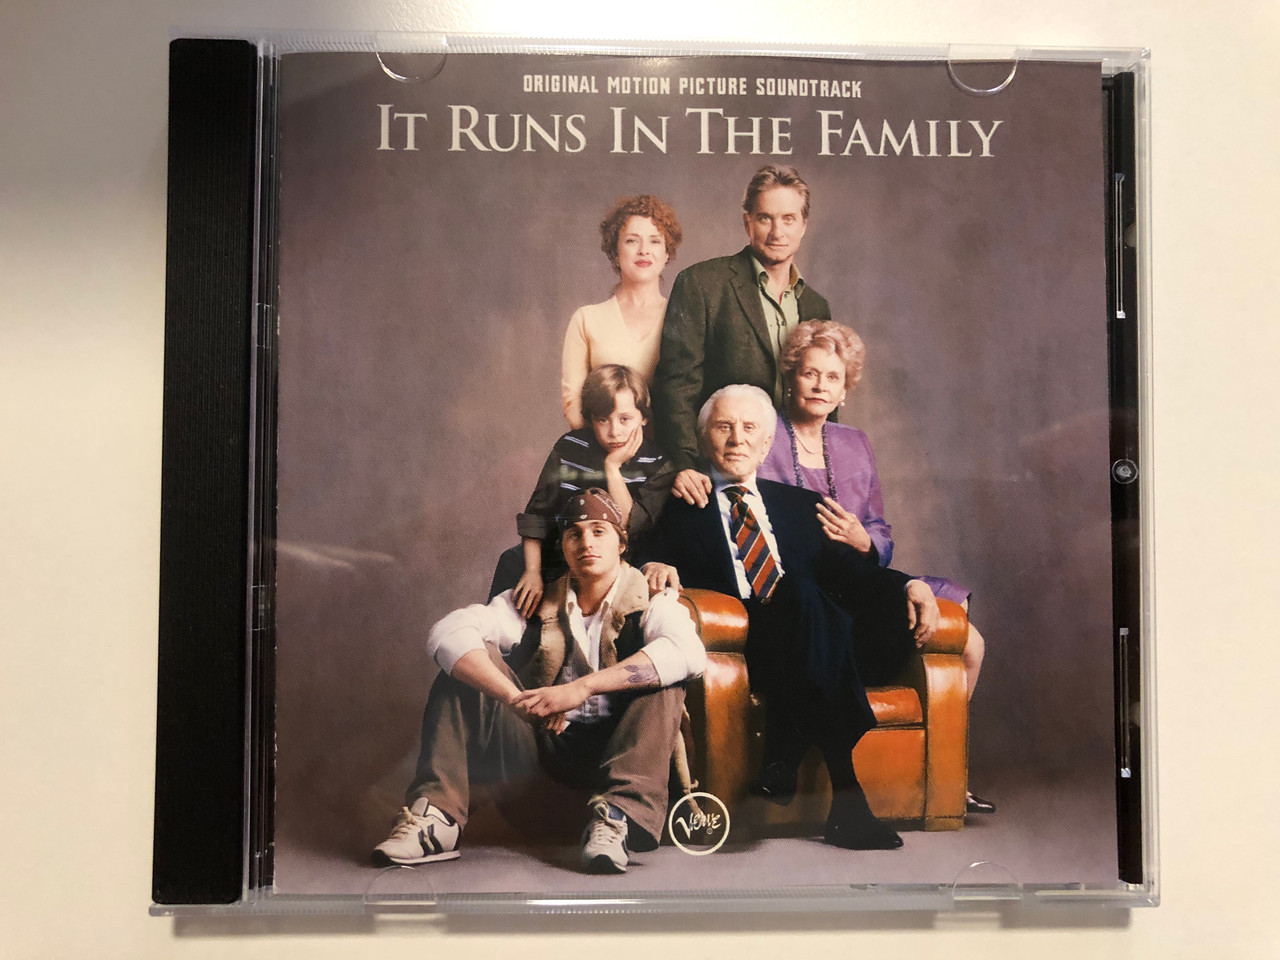 https://cdn10.bigcommerce.com/s-62bdpkt7pb/products/28989/images/173040/It_Runs_In_The_Family_-_Original_Motion_Picture_Soundtrack_Verve_Records_Audio_CD_2003_065_567-2_1__26137.1617008134.1280.1280.JPG?c=2&_ga=2.75978261.1092136281.1617705152-1353278764.1617705152